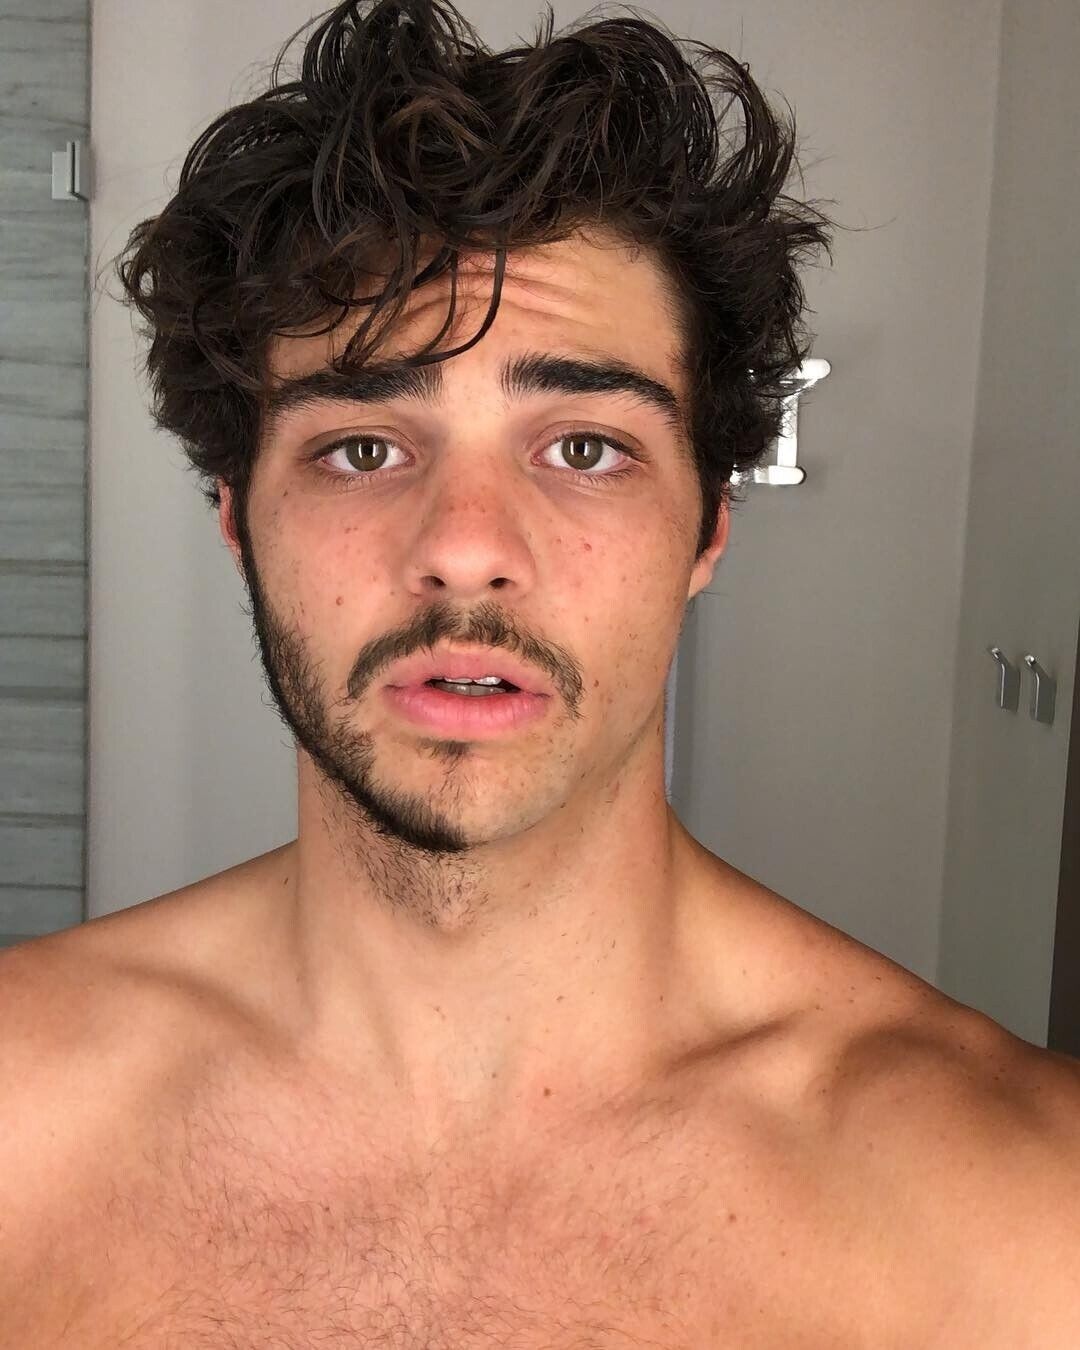 Best of Noah centineo nude video